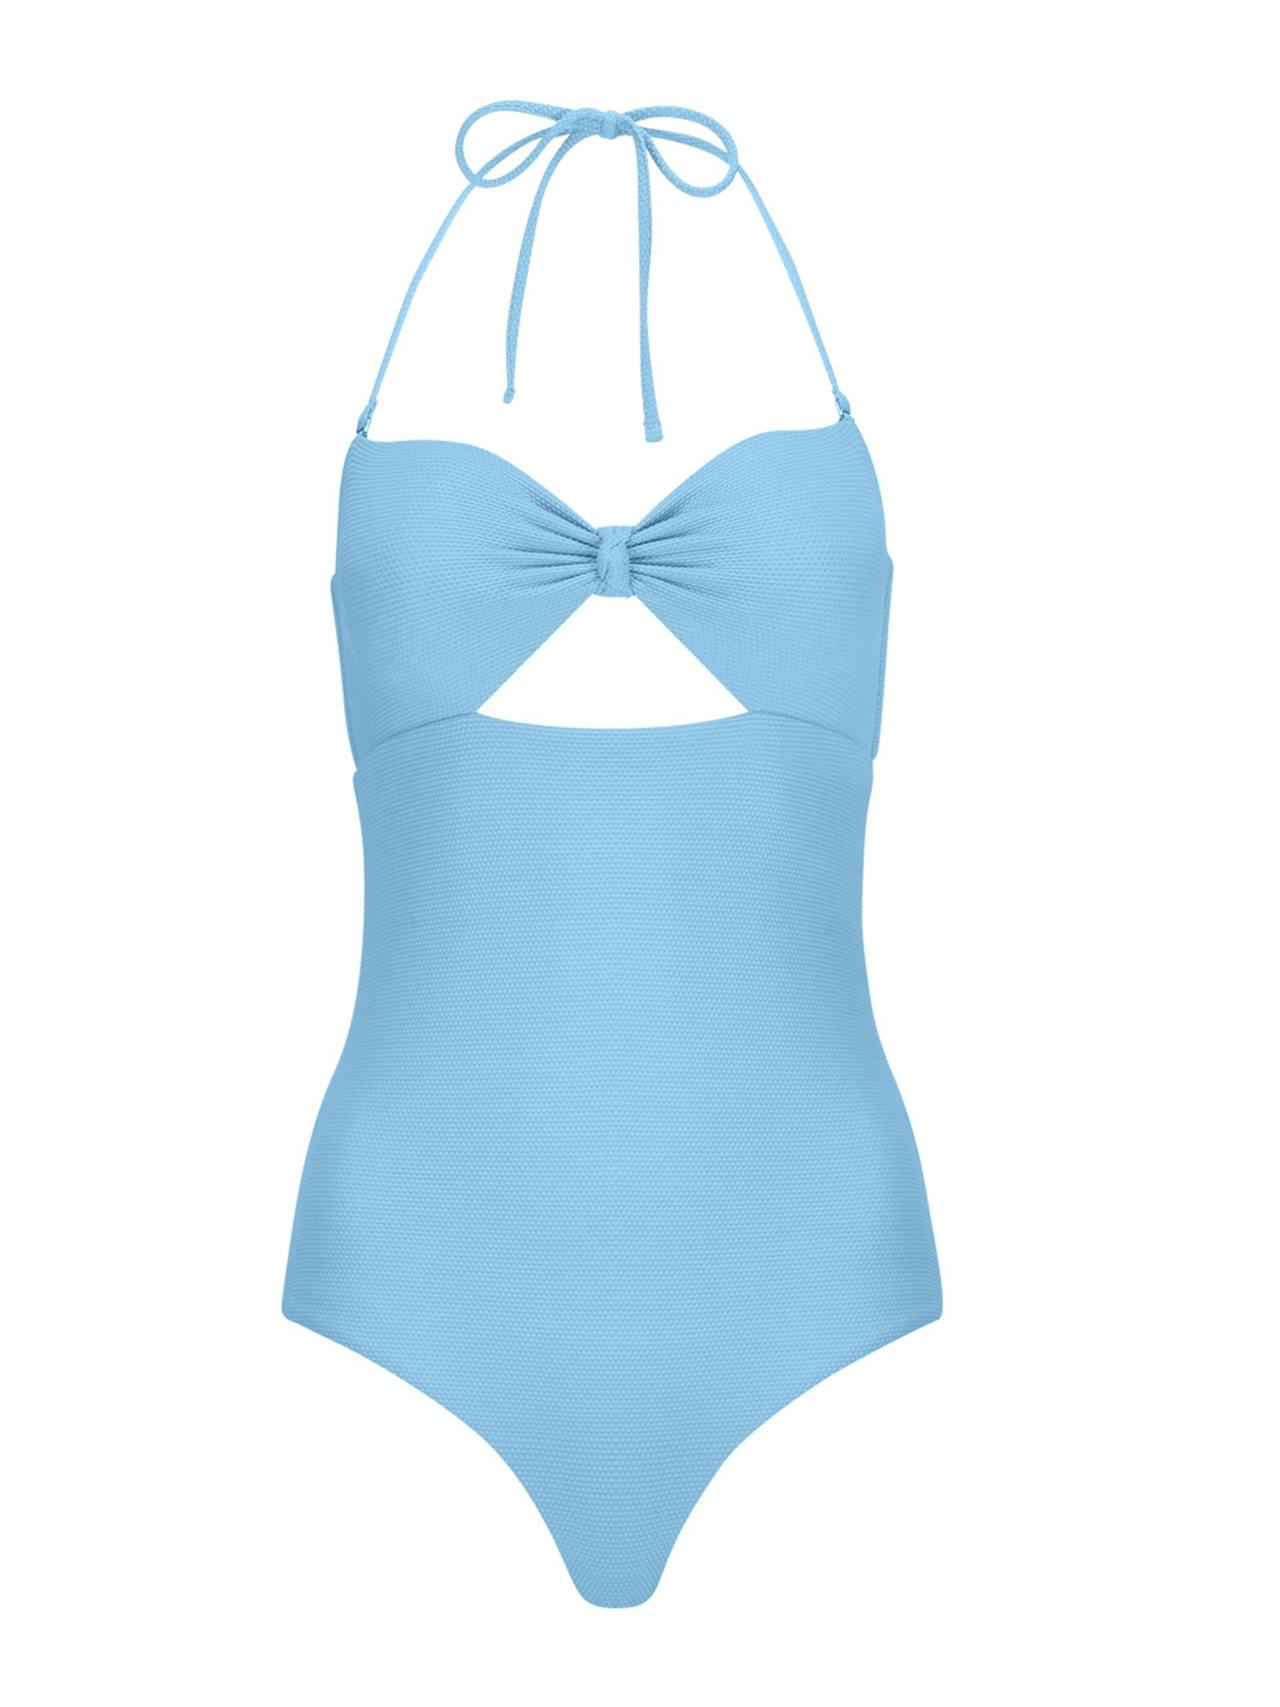 The Chazzy swimsuit in summer blue